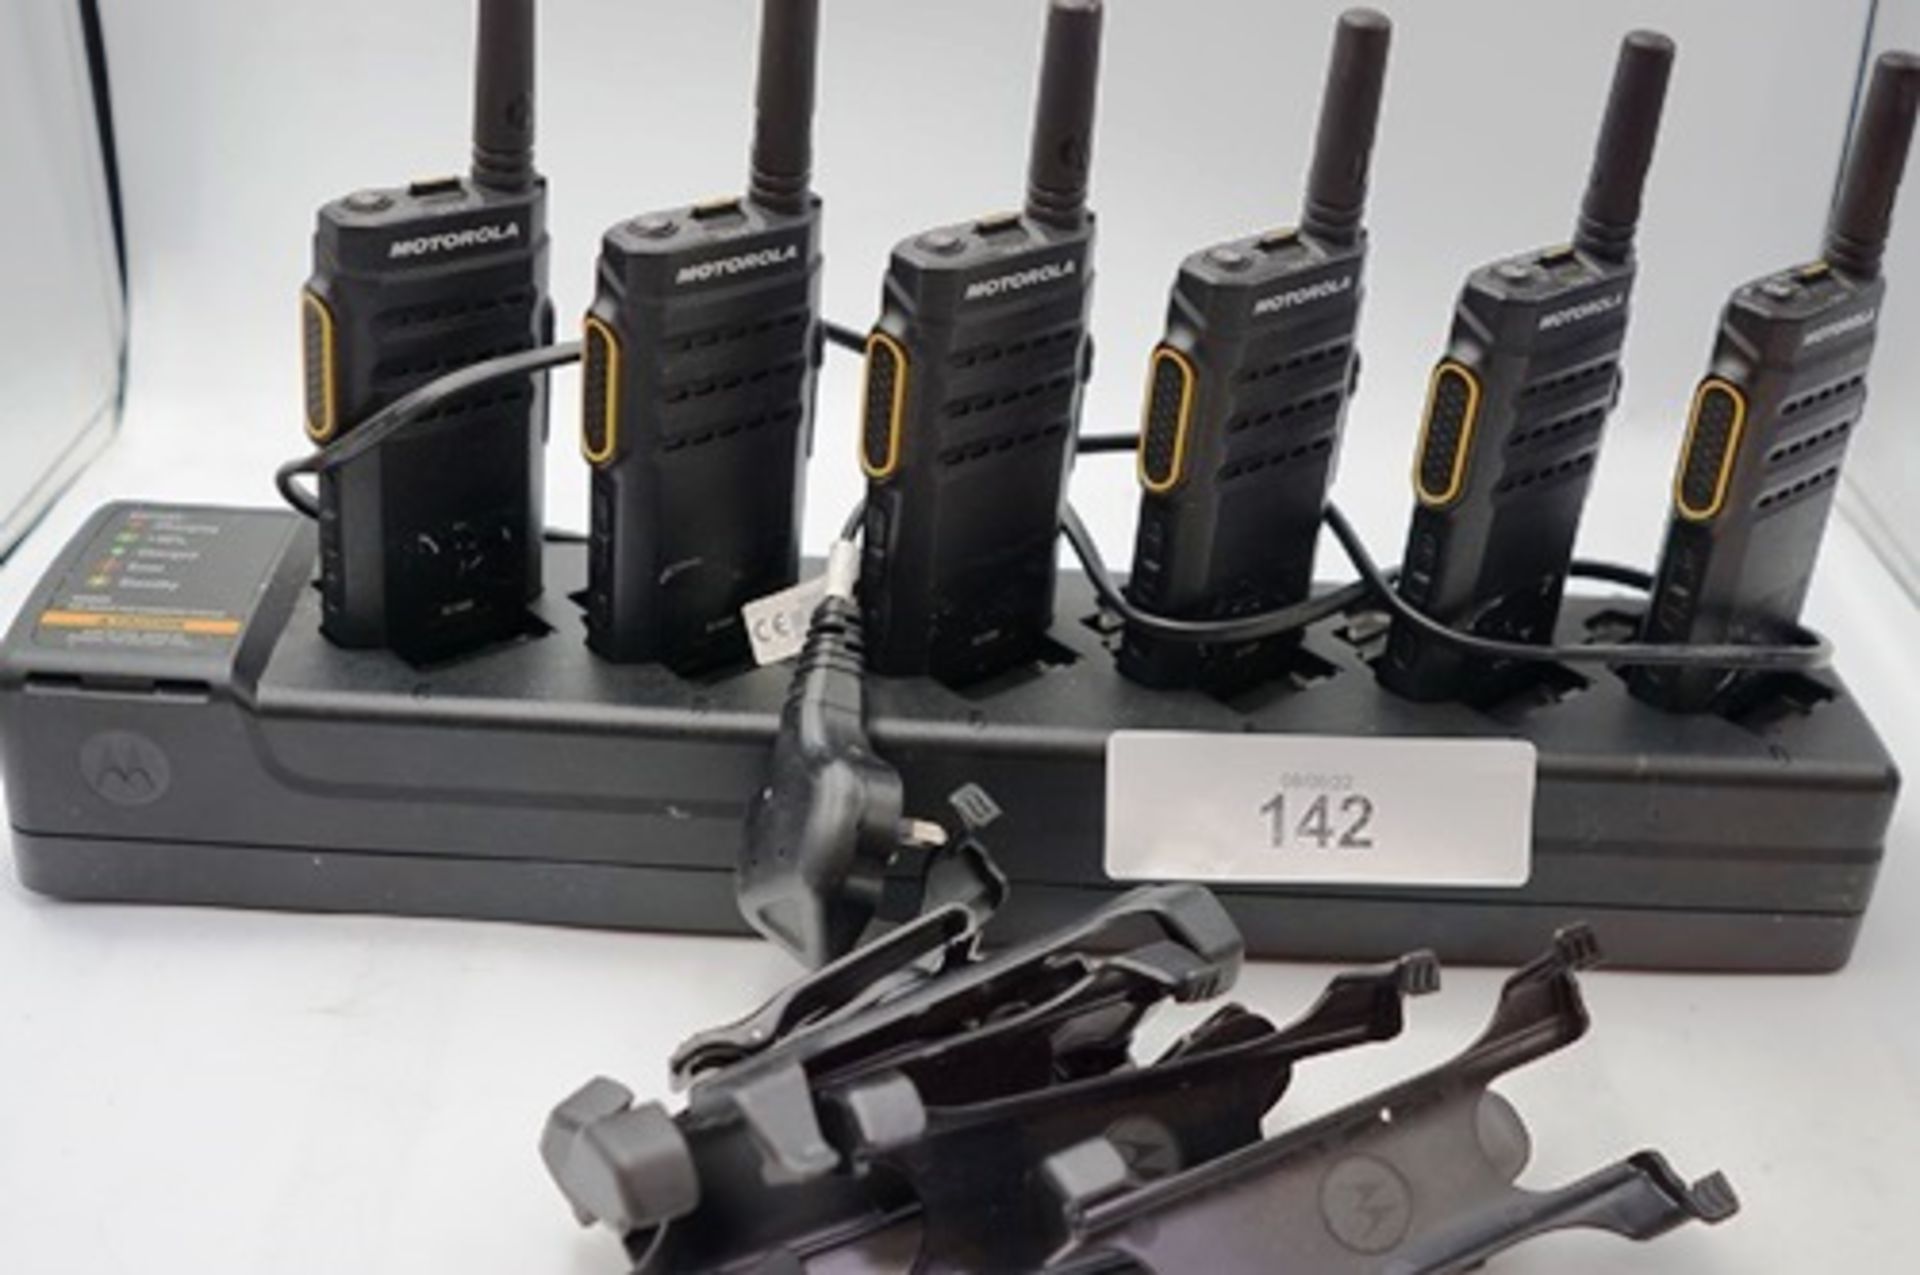 6 x Motorola Walkie-Talkies and charger, model SL1600 - Second-hand, ex-hire (Cabs)